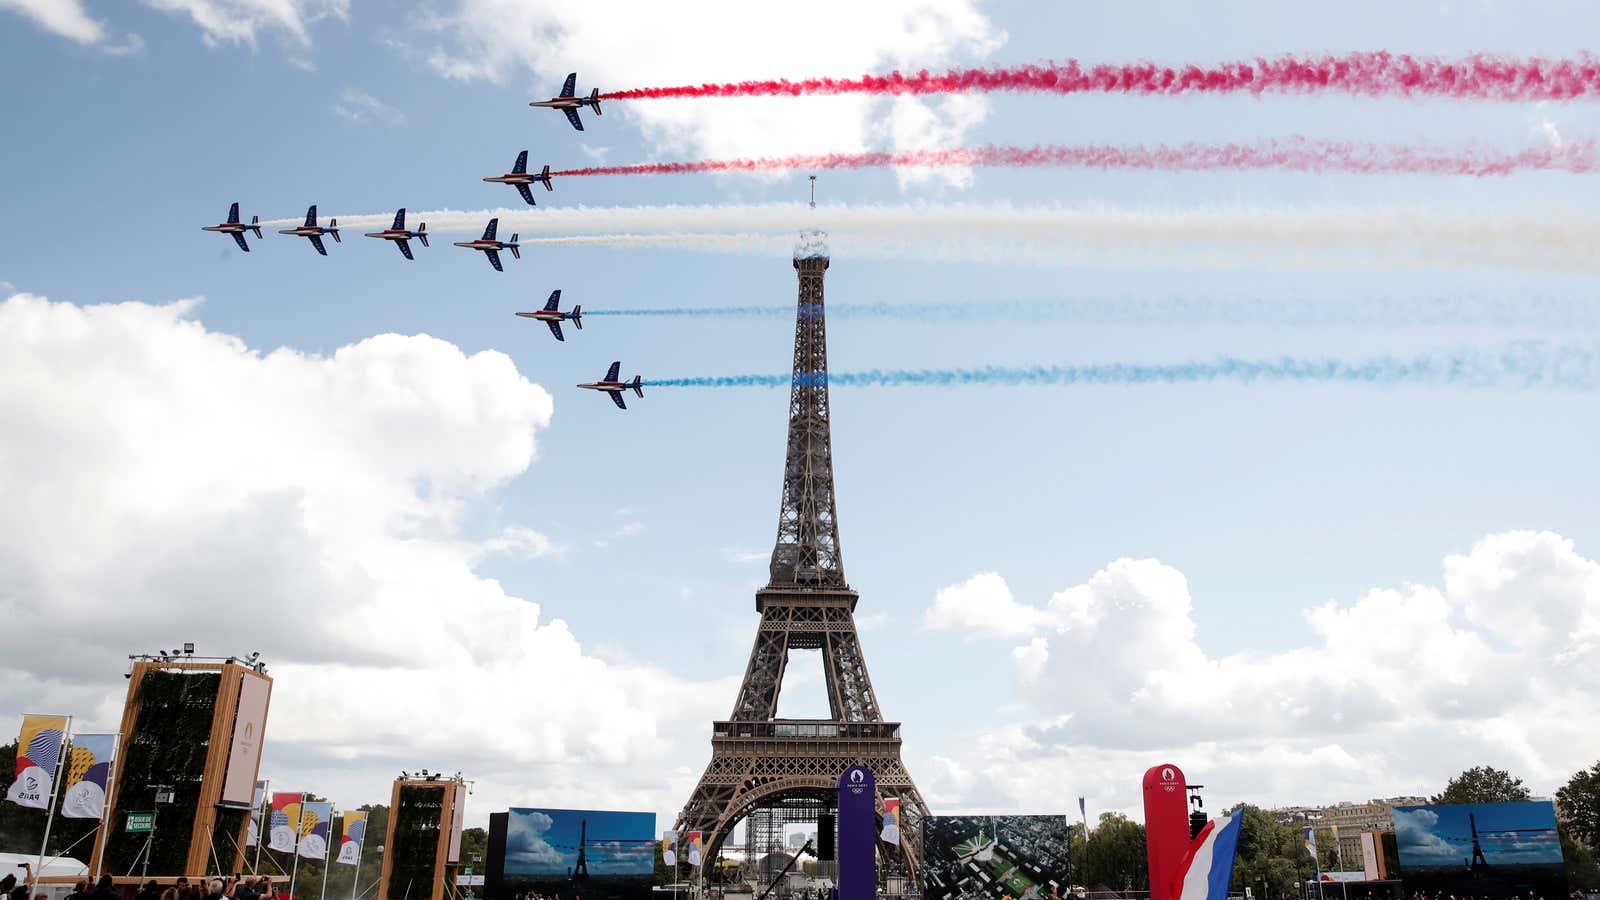 Alpha jets from the French Air Force Patrouille de France fly past Eiffel Tower at Paris’ Olympics fan zone during the closing ceremony of the Tokyo games, at Trocadero Gardens in Paris, France, August 8, 2021.